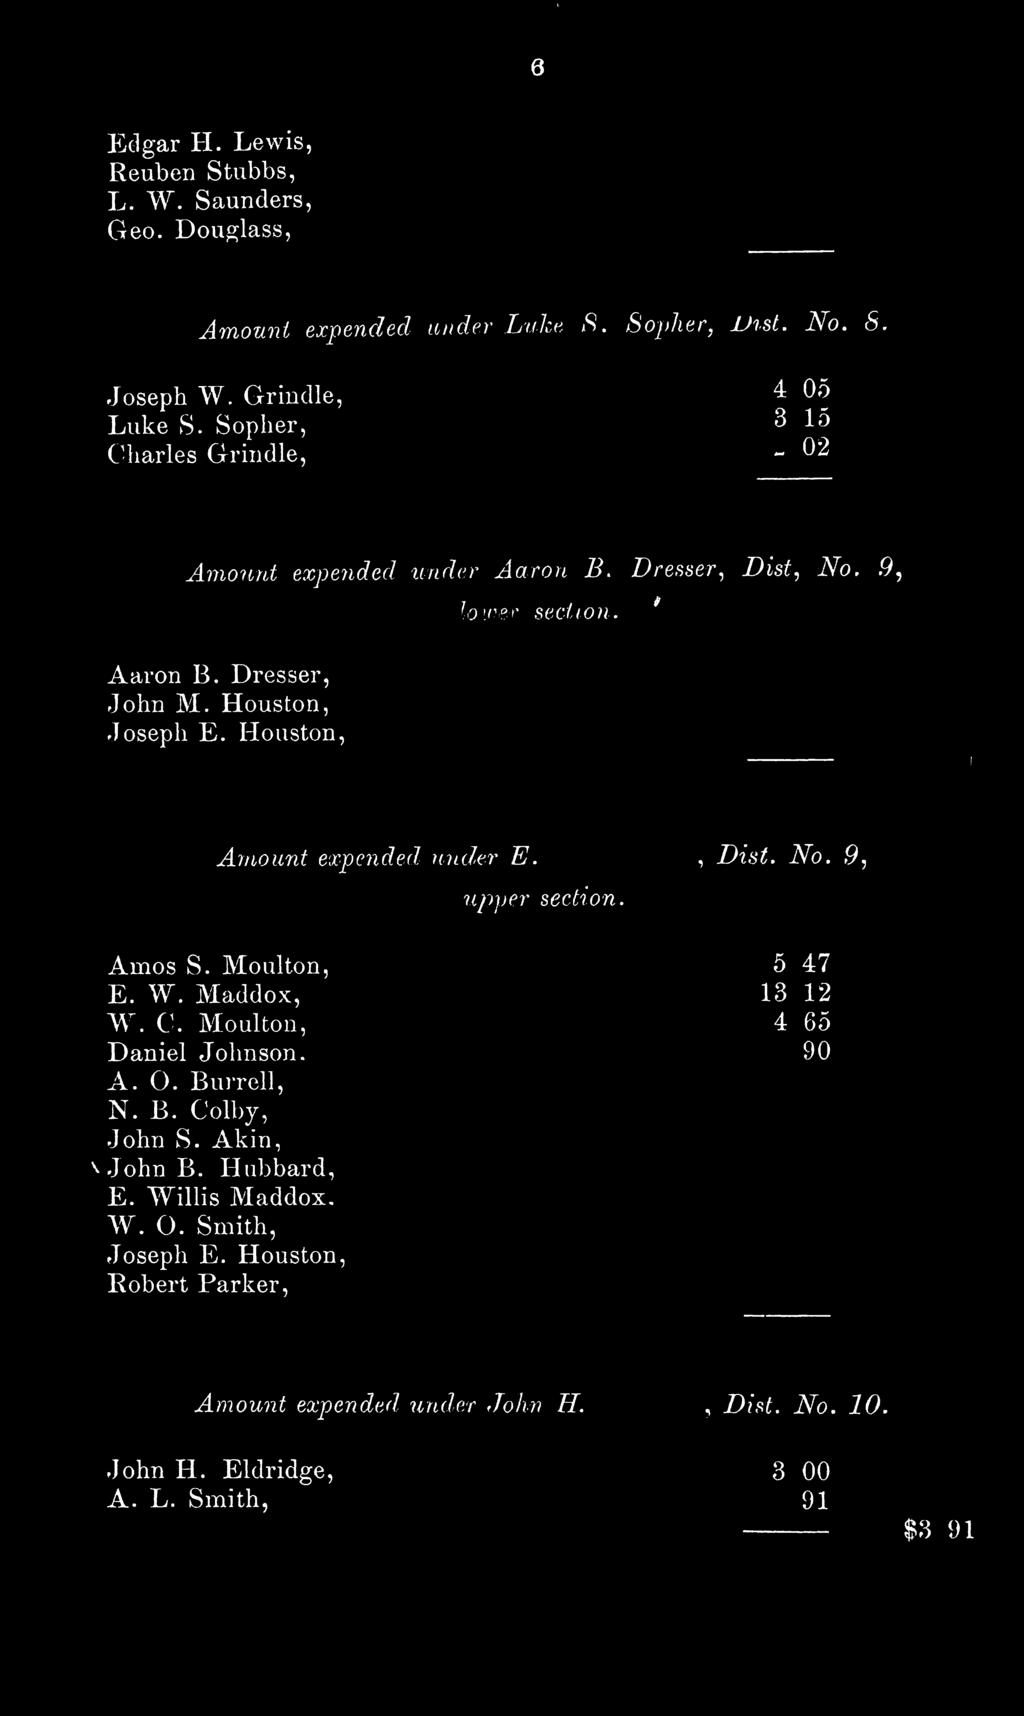 Amount expended, under E. Dist. No. 9 j upper section. Amos S. Moulton, 5 47 E. W. Maddox, 13 12 W. C. Moulton, 4 65 Daniel Johnson. 90 A. O. Burrell, N.B. Colby, John S.